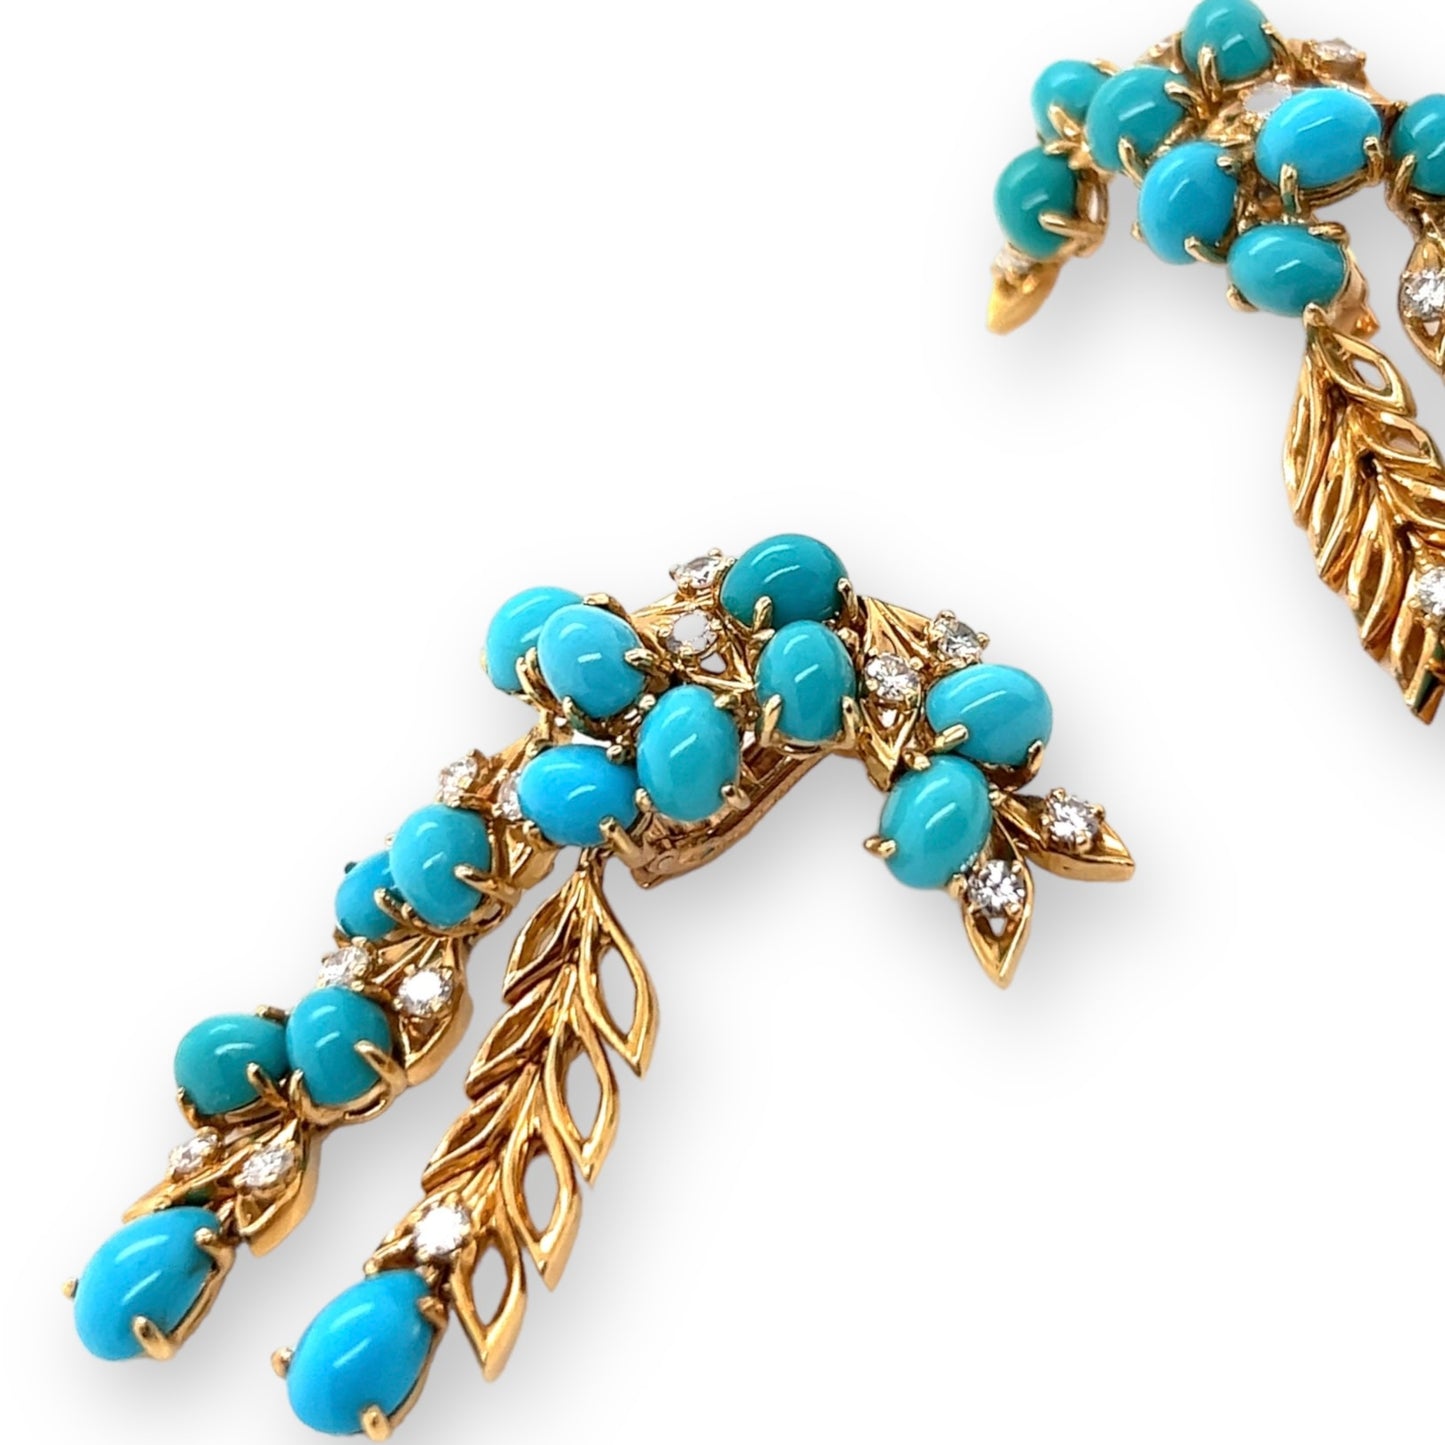 Cartier Paris 1950s 18KT Yellow Gold Turquoise & Diamond Earrings close-up